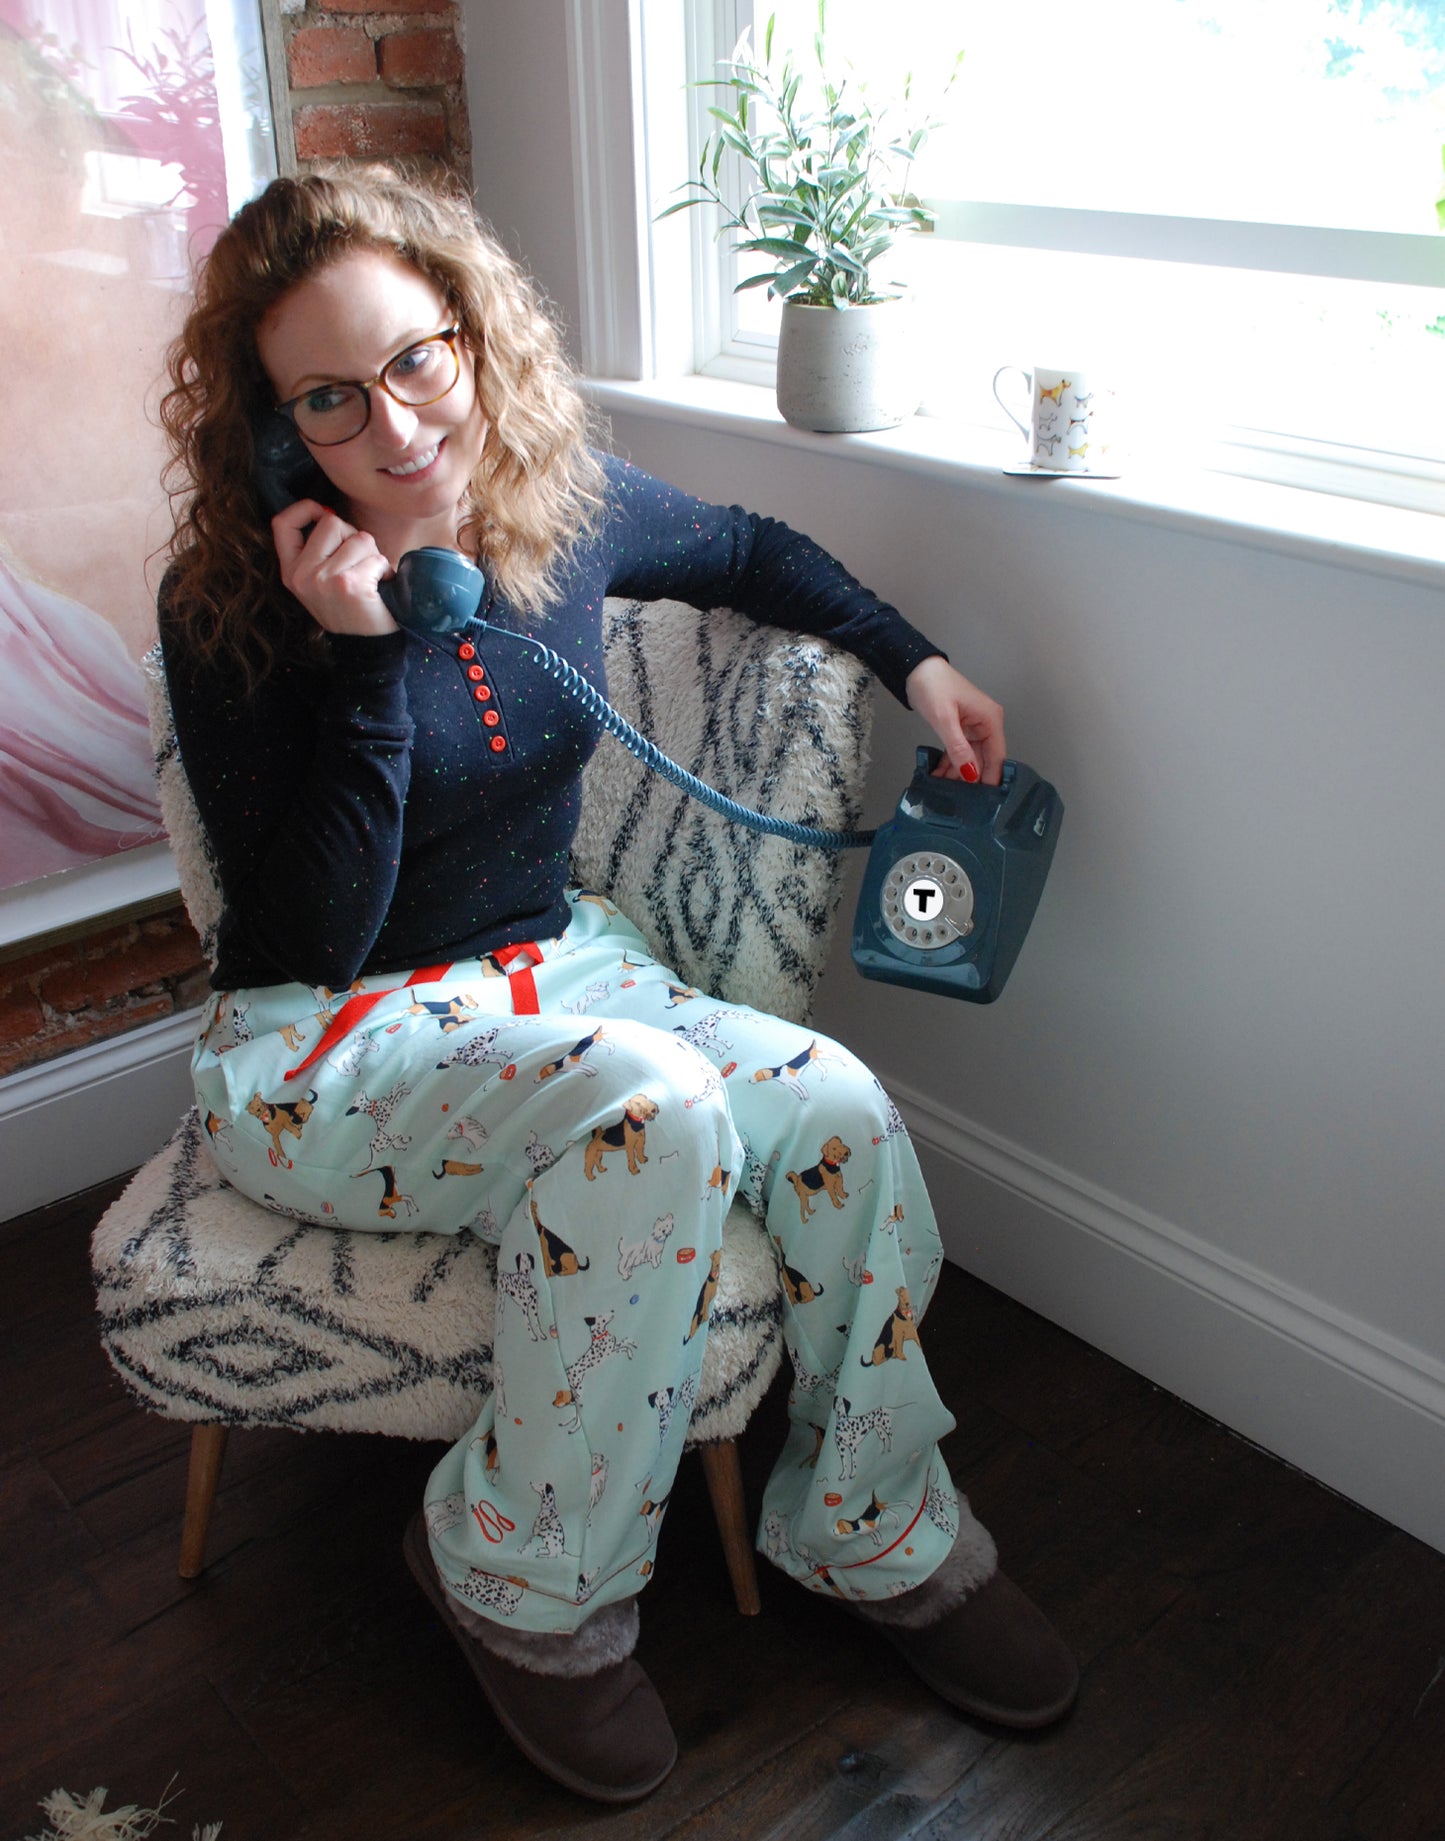 Tessie Clothing | Poppy Dog Print Pyjama Trousers | Dog Print featuring Airedale Terriers, Westies, Beagles and Dalmatians on a soft green background.